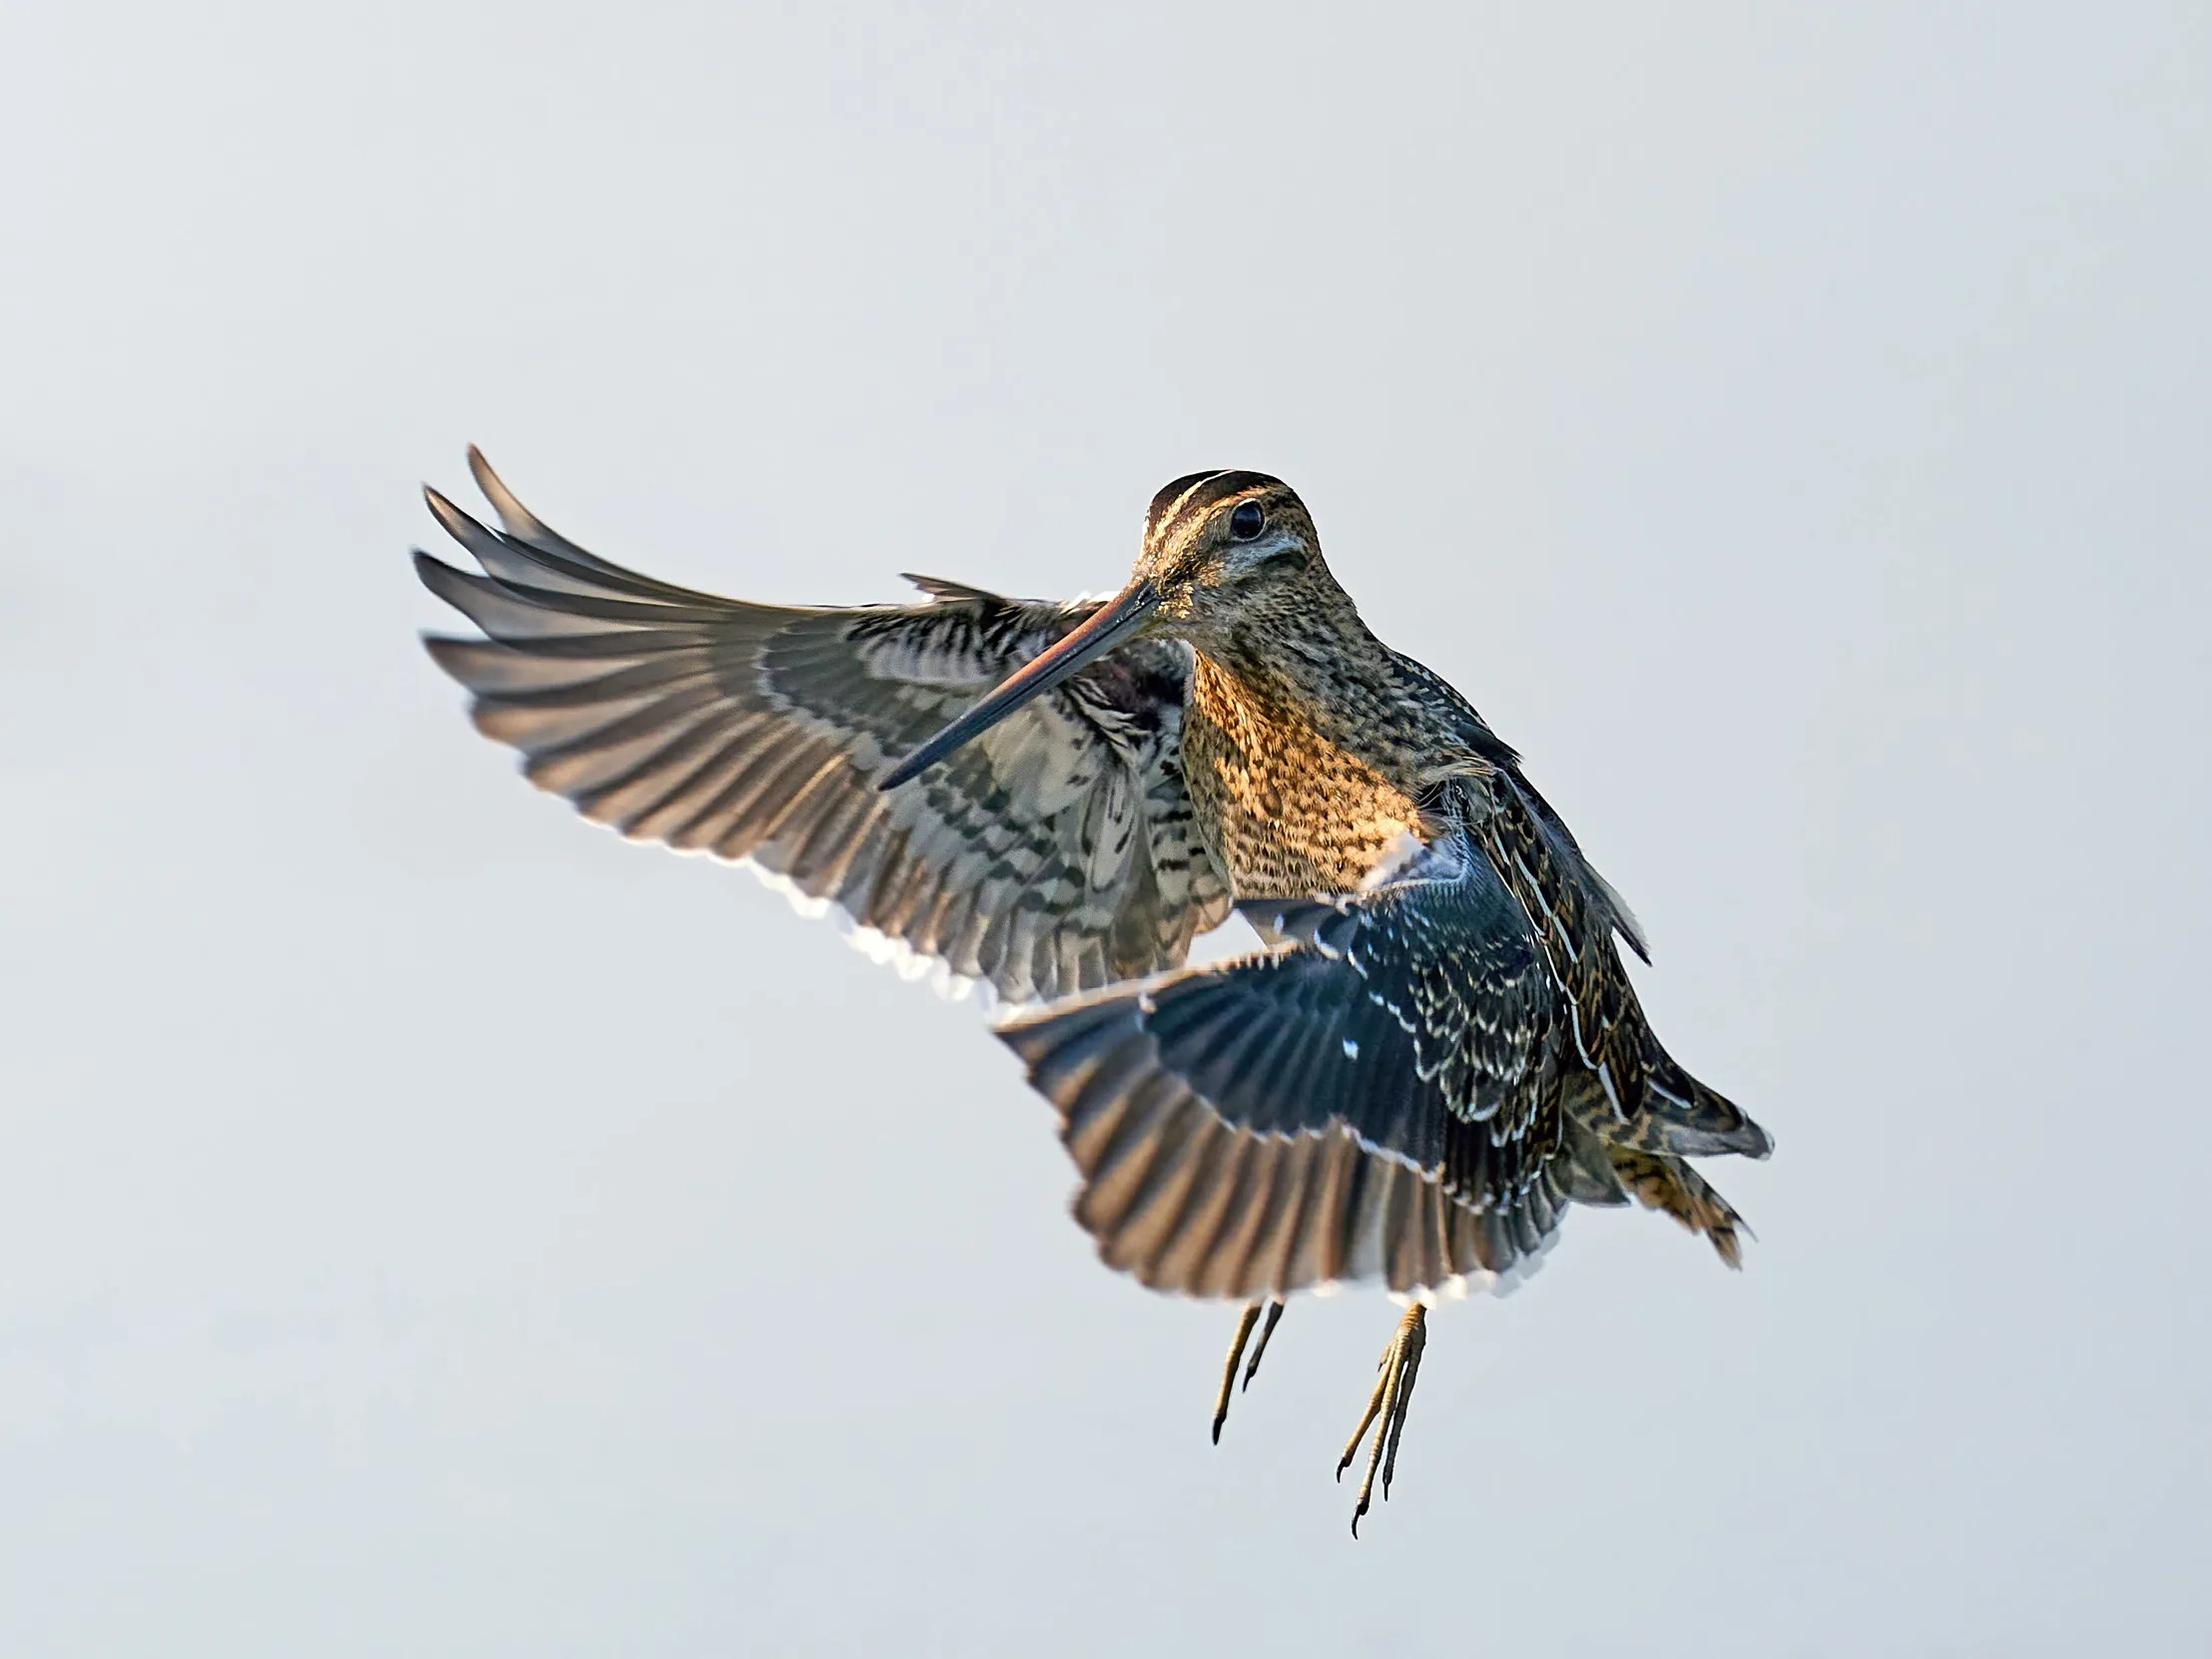 Lone Snipe, turning in the air